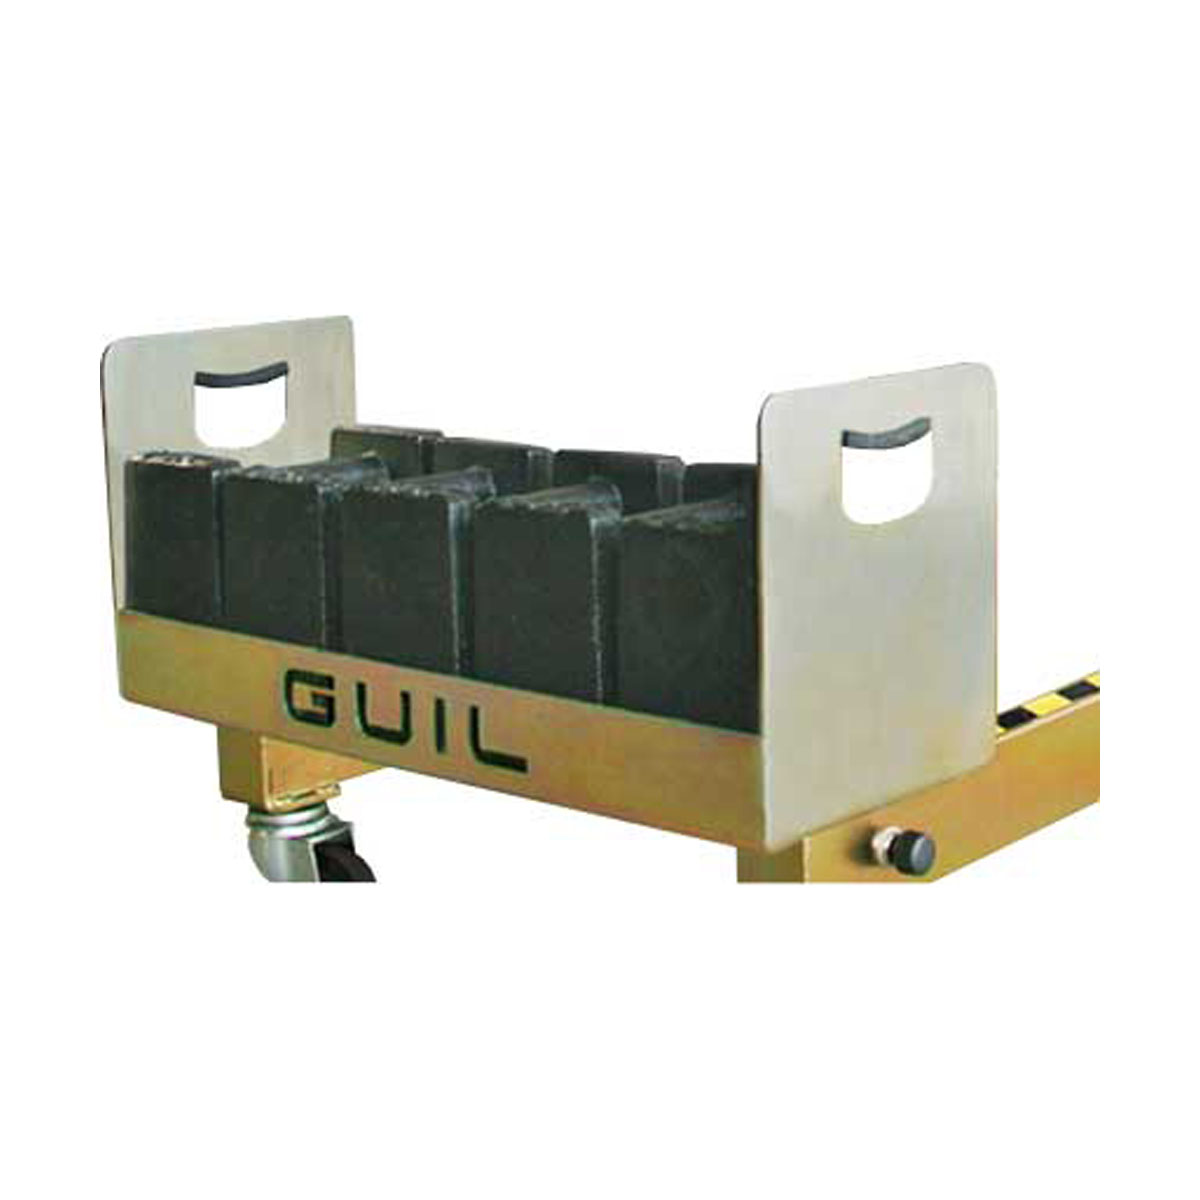 GUIL Counterweight Attachment